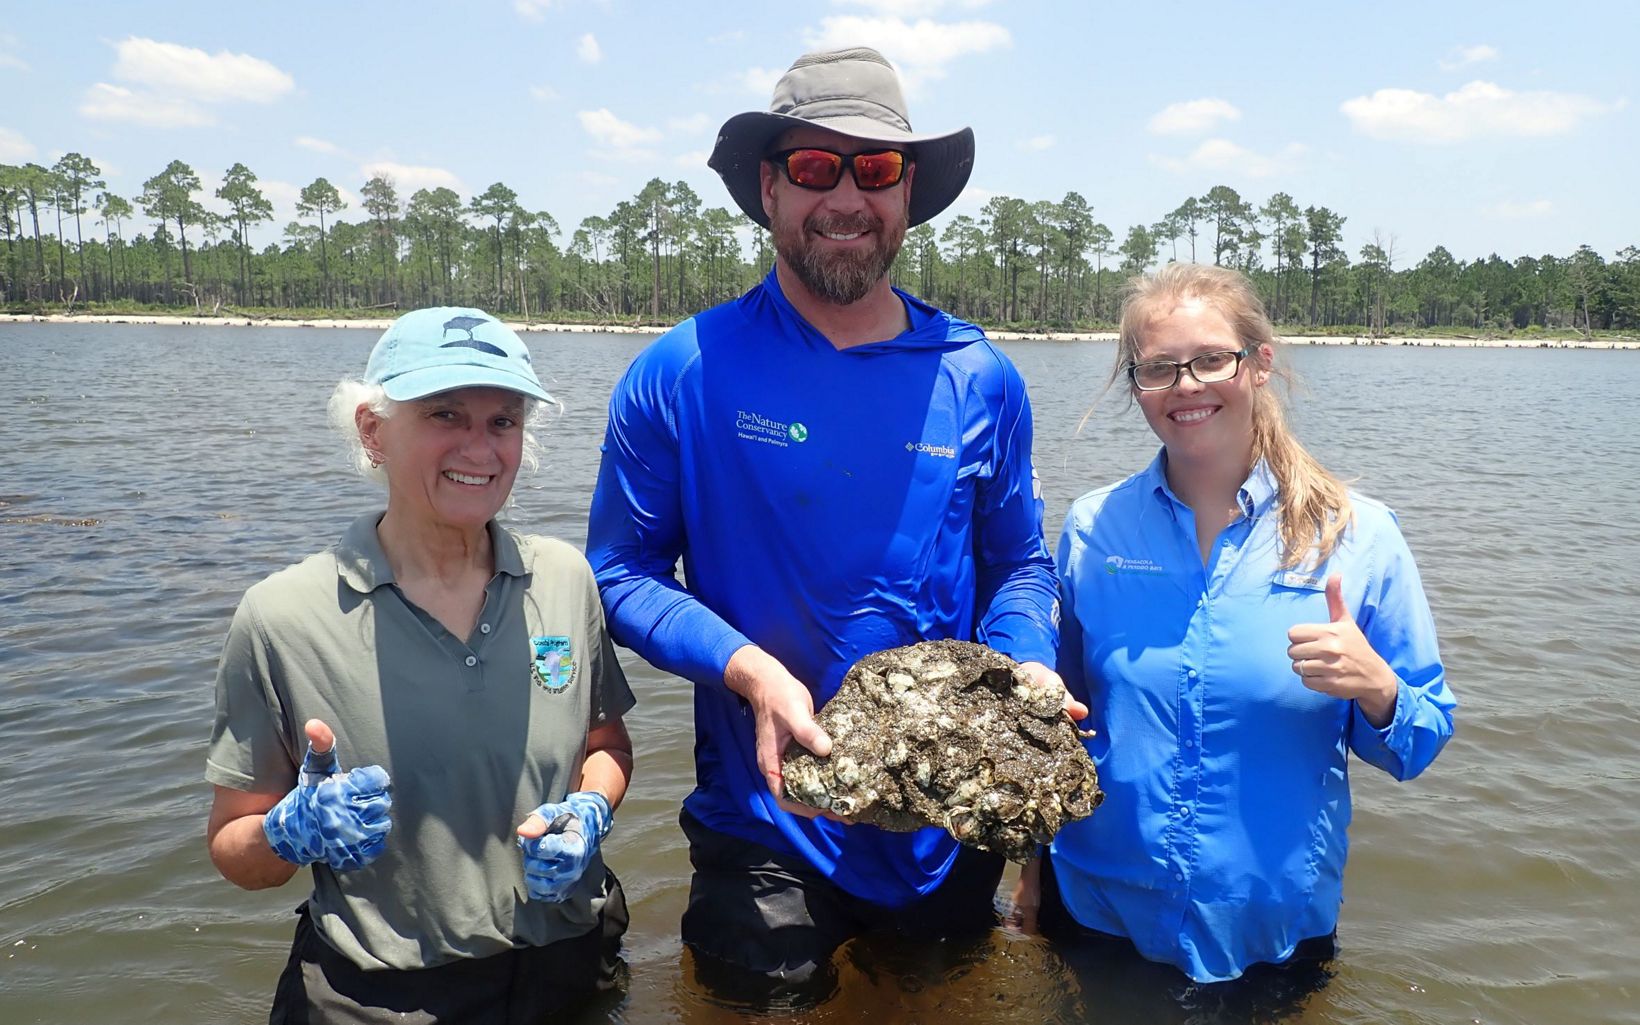 Three people stand smiling in waist-deep water holding rocks with new oysters grabbing hold.